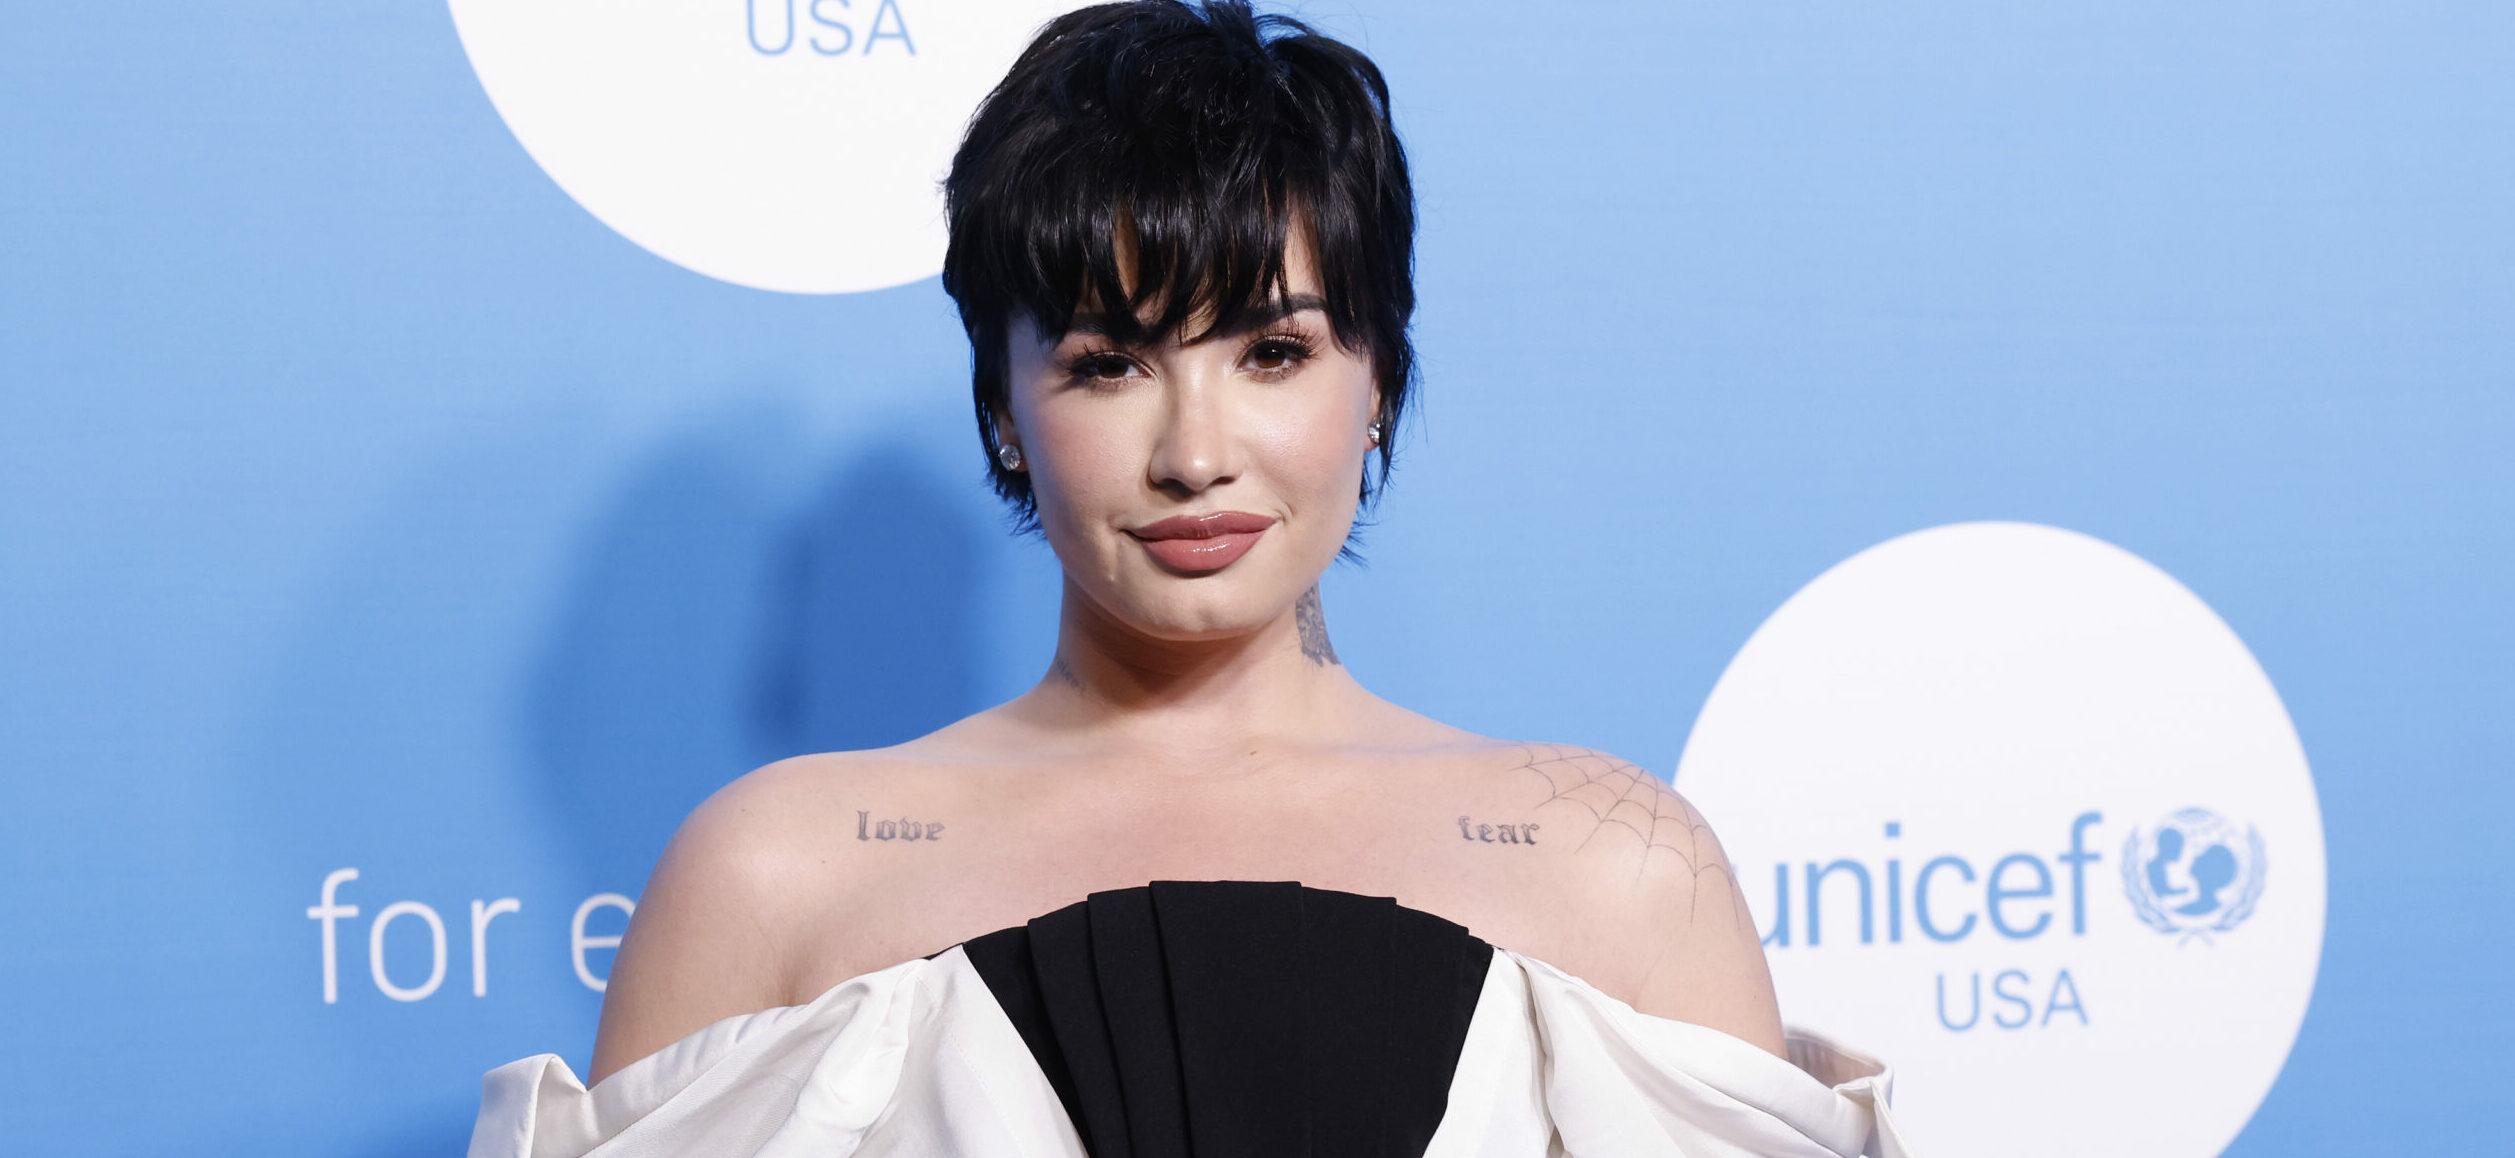 Demi Lovato arrives on the red carpet at the 2022 UNICEF Gala at The Glasshouse on Tuesday, November 29, 2022 in New York City.